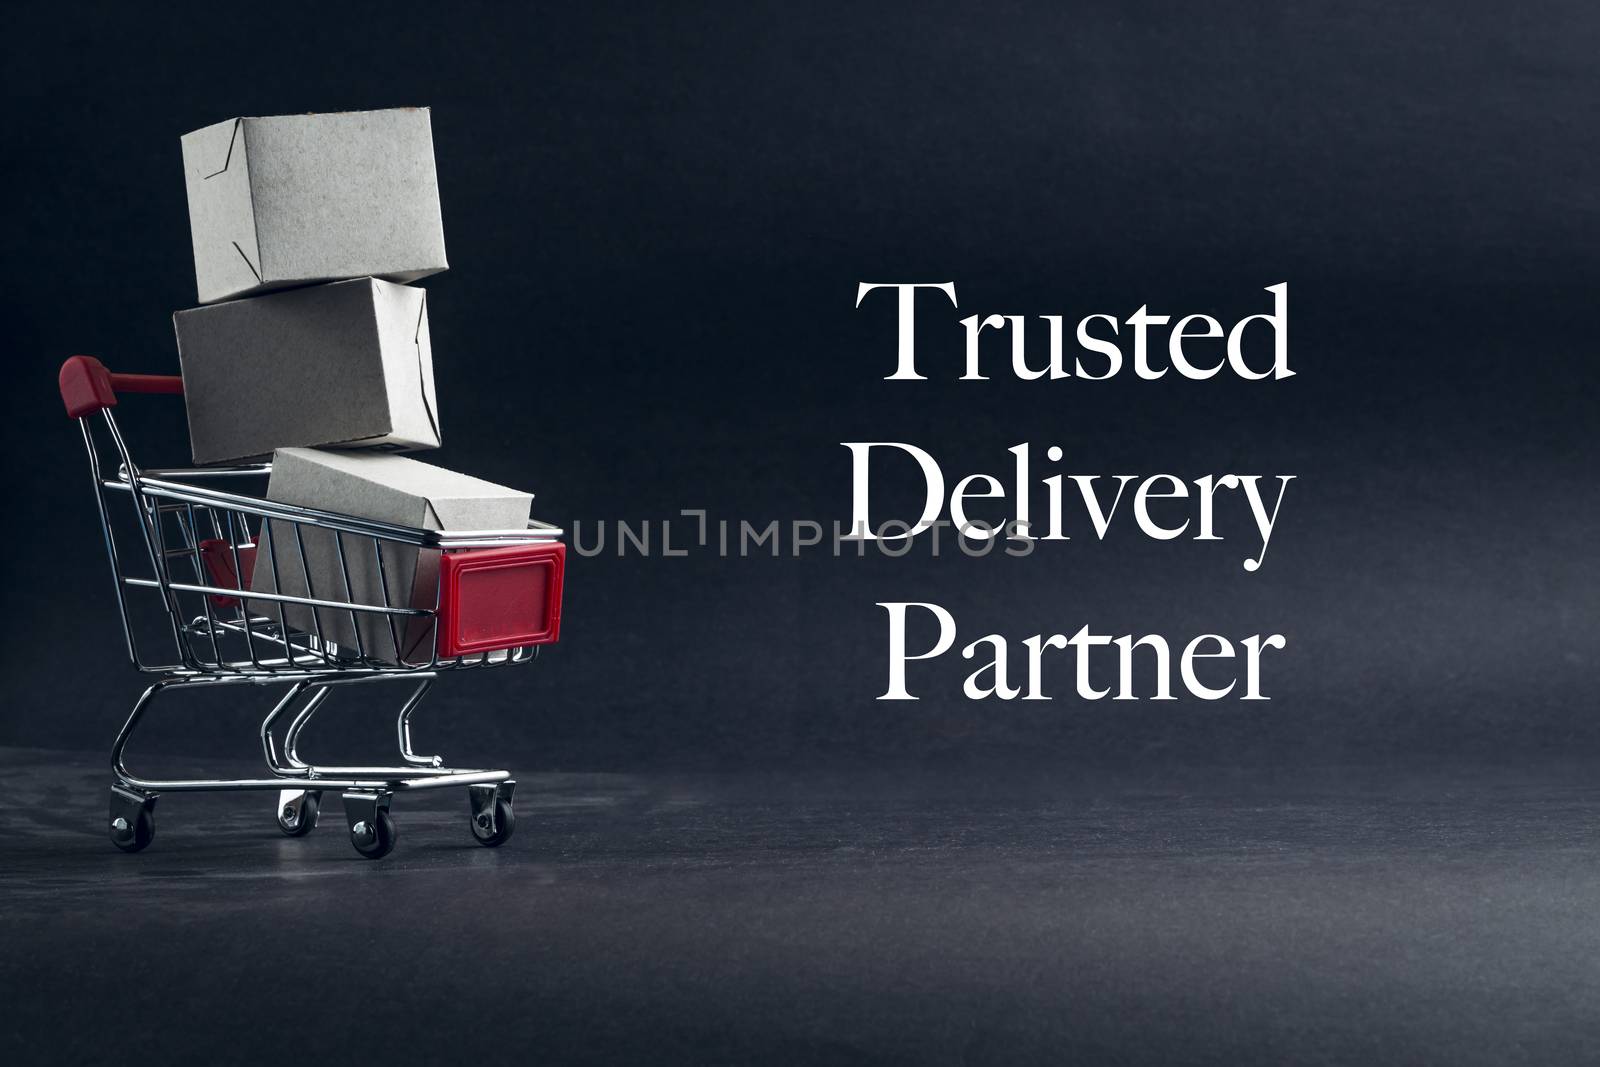 TRUSTED DELIVERY PARTNER text with shopping cart on dark background by silverwings